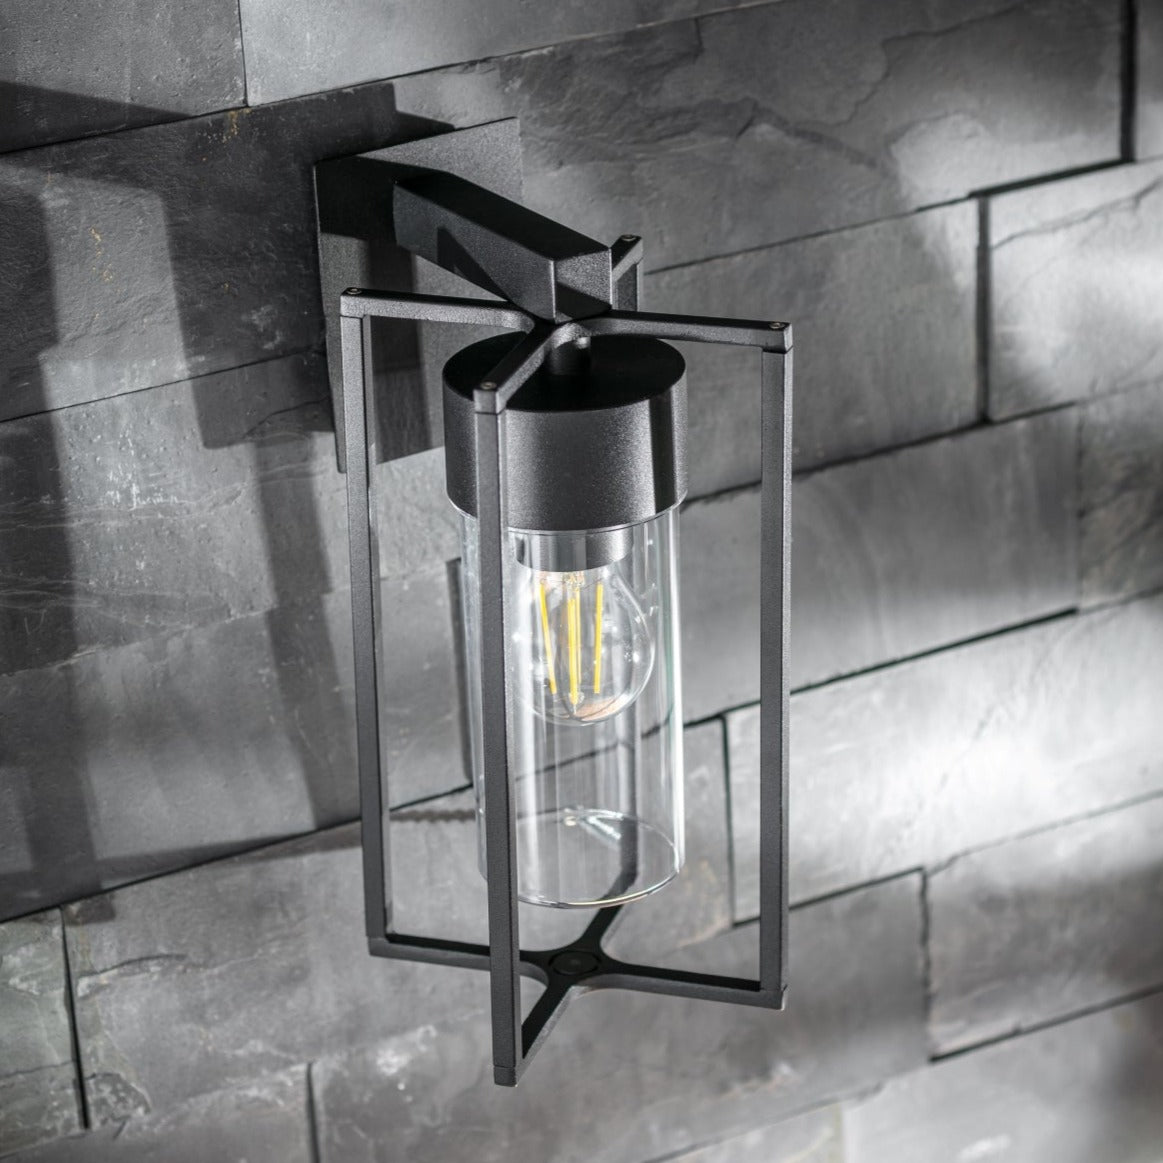 If you’re looking for a modern take on a traditional outdoor wall light, this black lantern wall light with clear diffuser is perfect for adding style and protection for your home. This classic design with a contemporary twist, styled with a metal lantern shape and fitted with a cylinder diffuser that allows the light to shine effectively